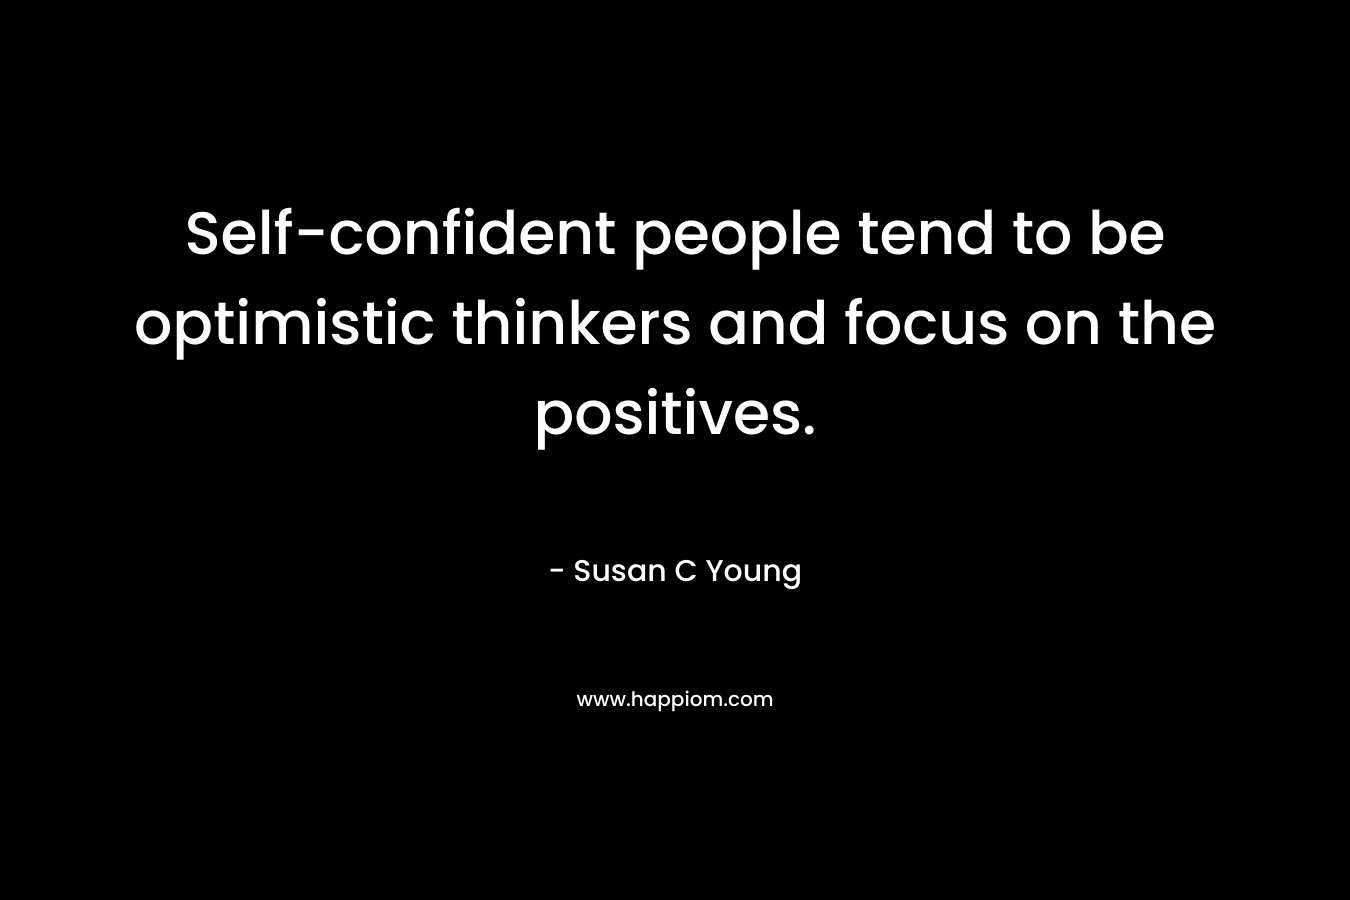 Self-confident people tend to be optimistic thinkers and focus on the positives. – Susan C Young